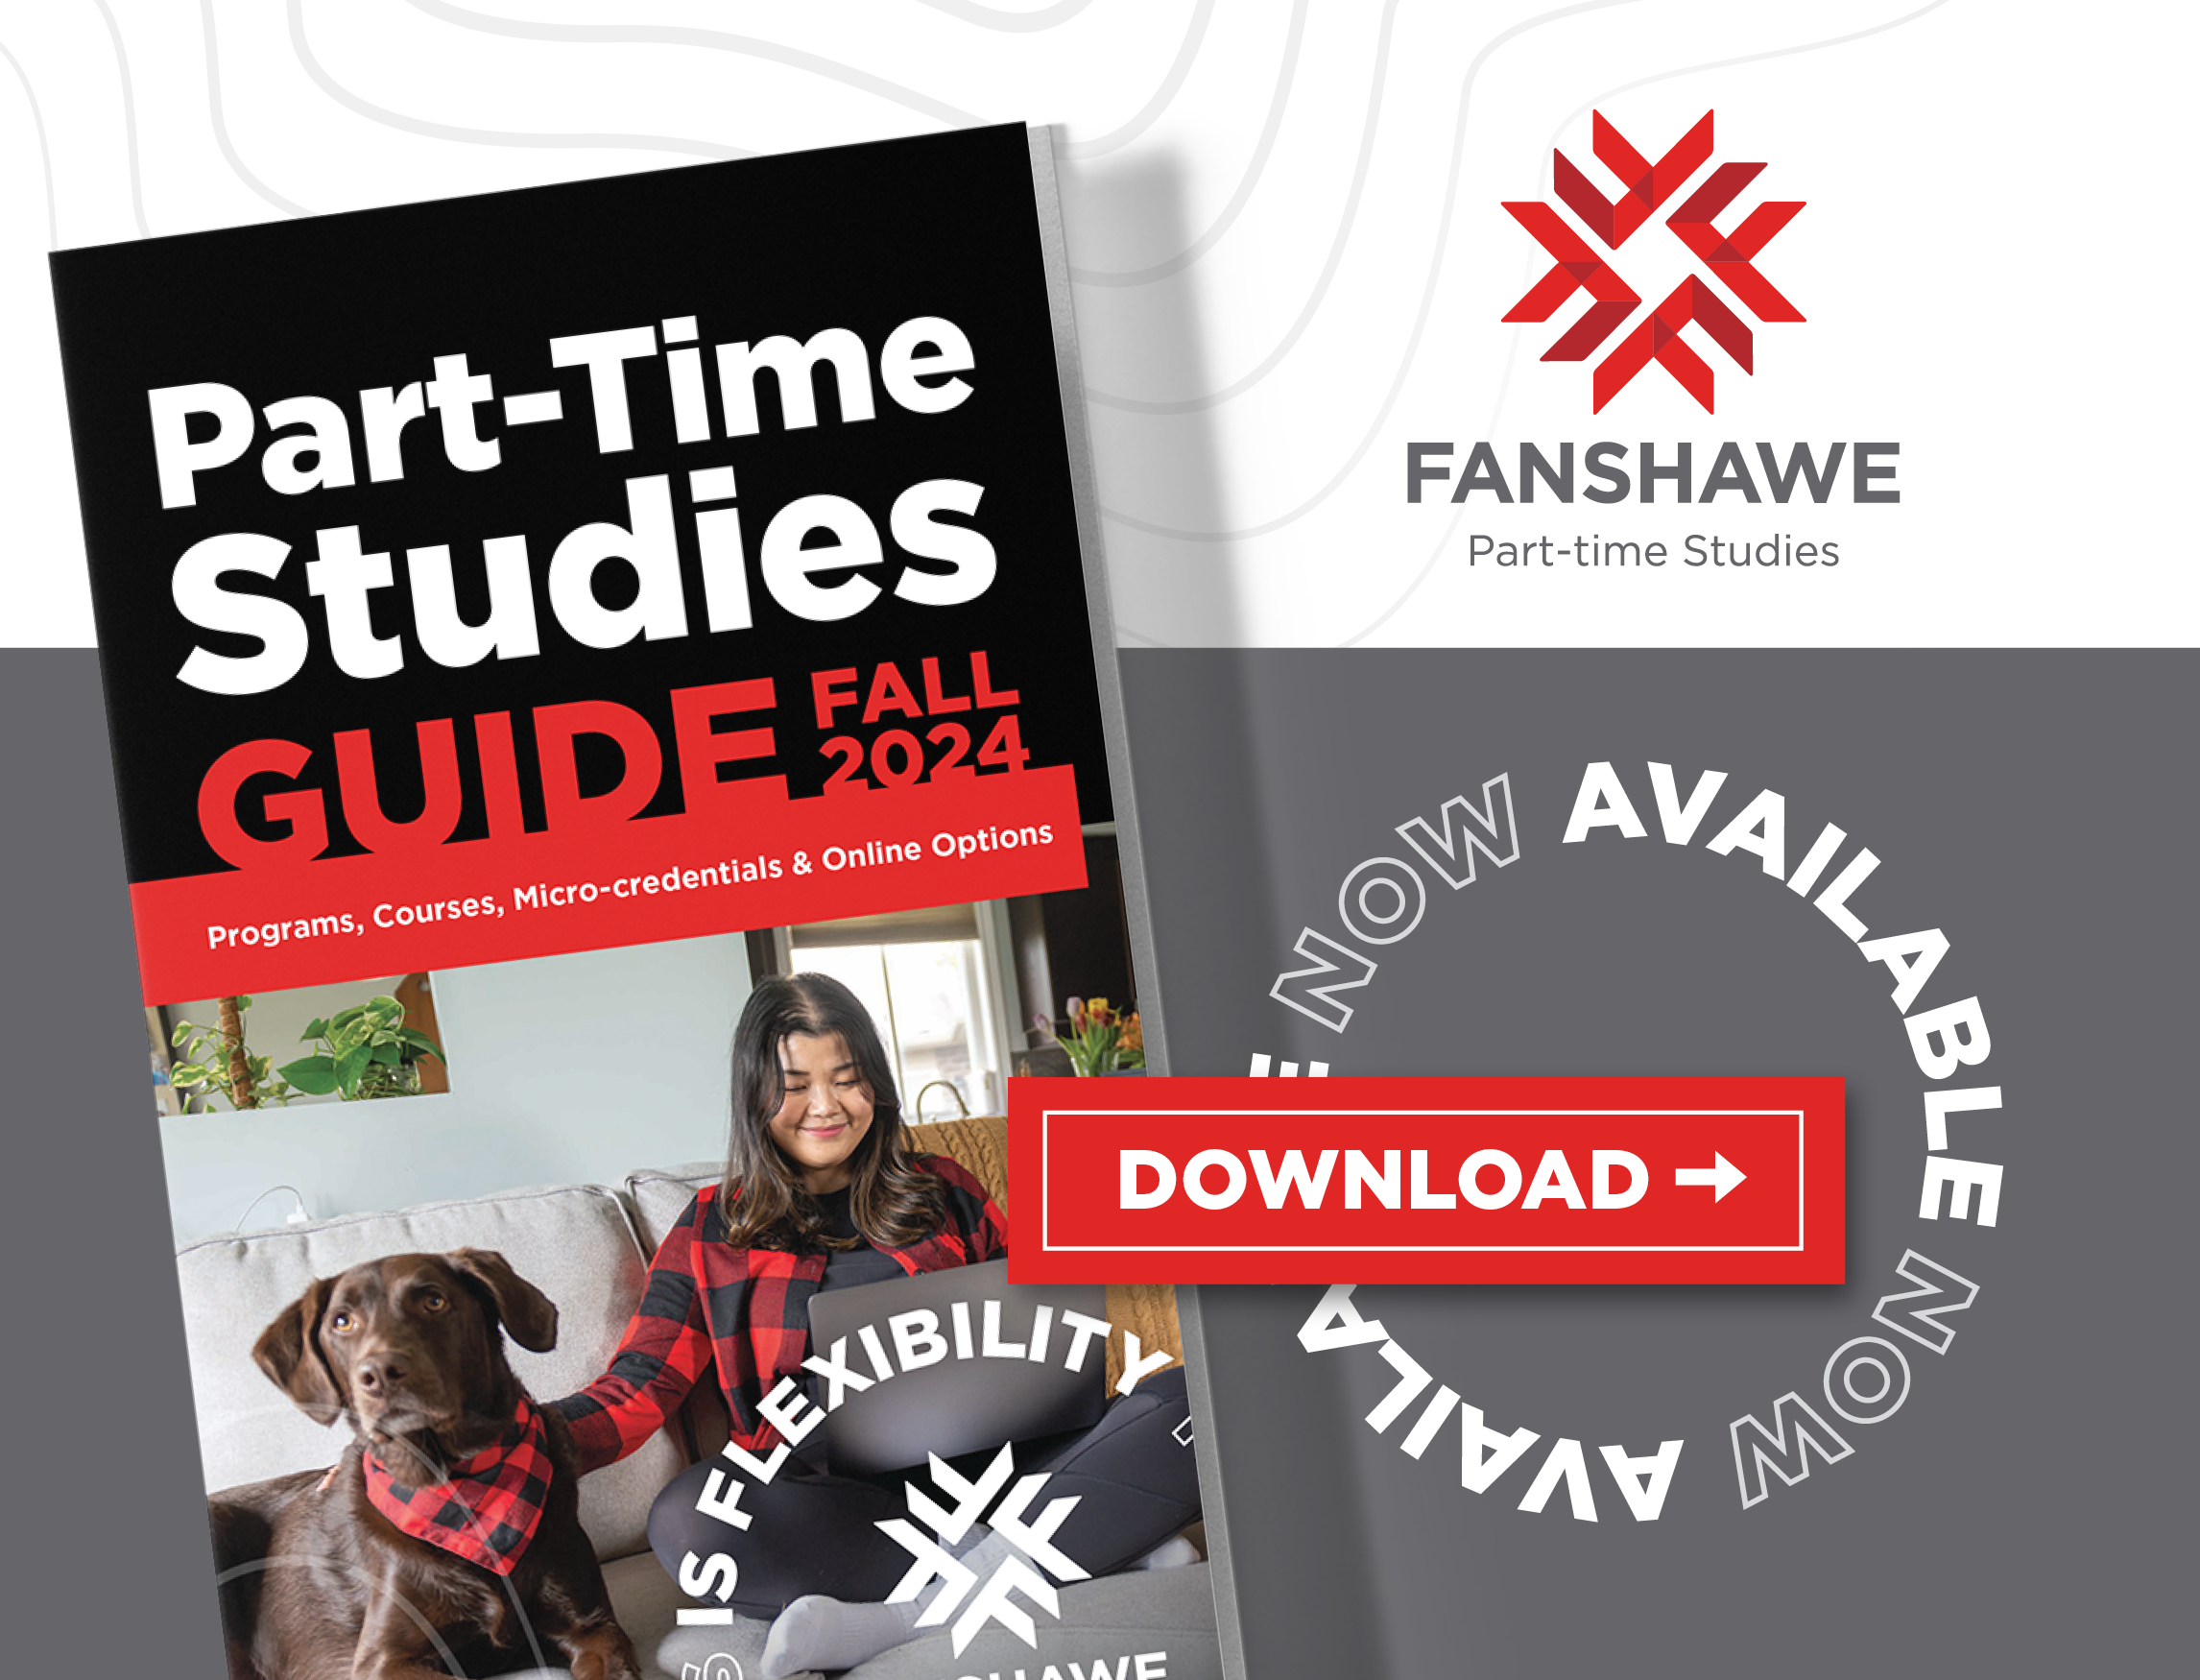 photo of the front page of the part-time studies guide